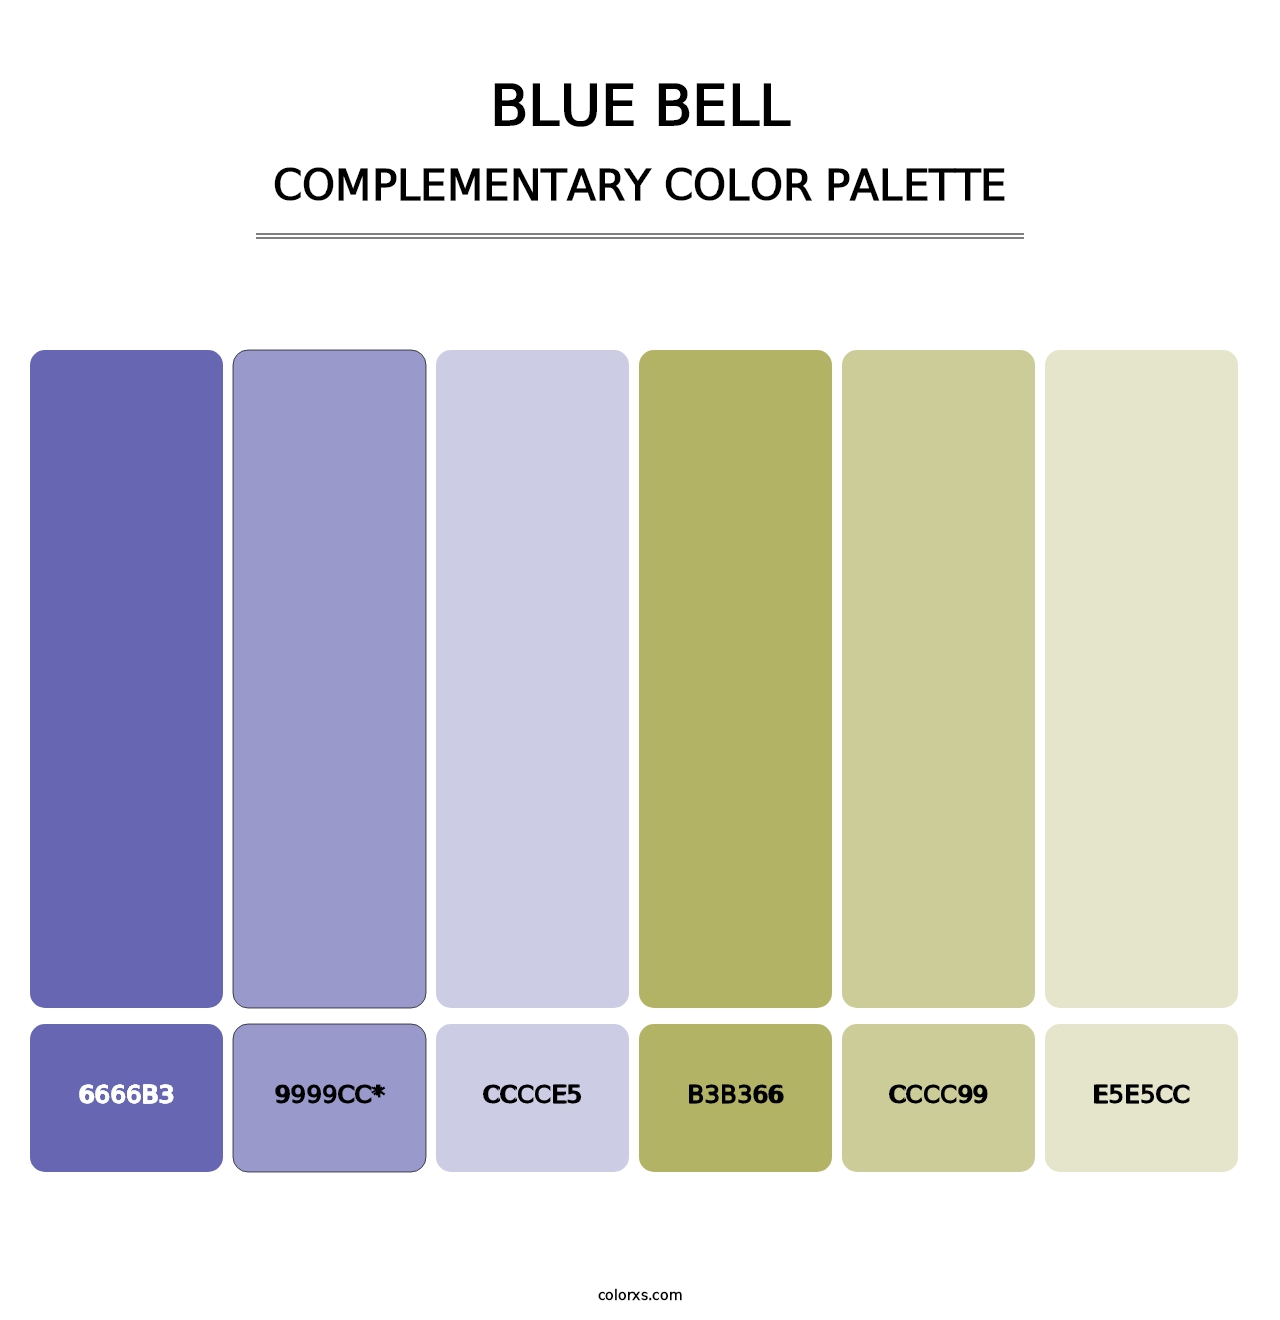 Blue Bell - Complementary Color Palette